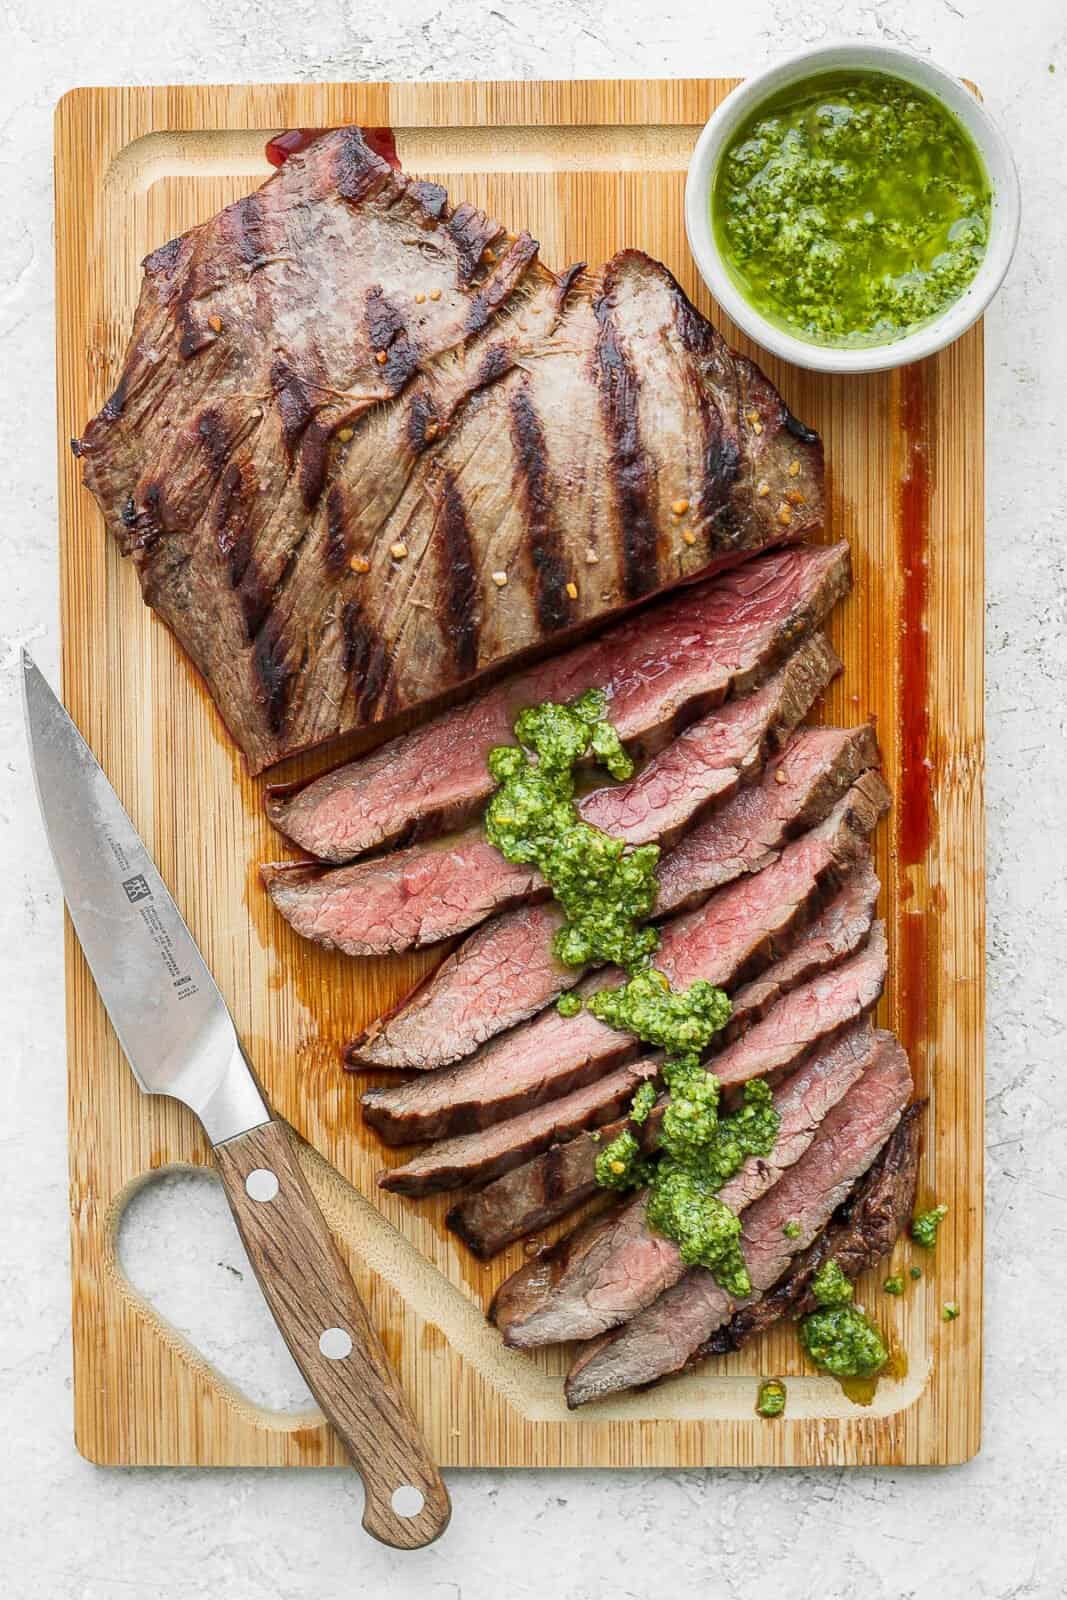 A grilled flank steak resting on a cutting board, part of it sliced with chimichurri sauce on it.